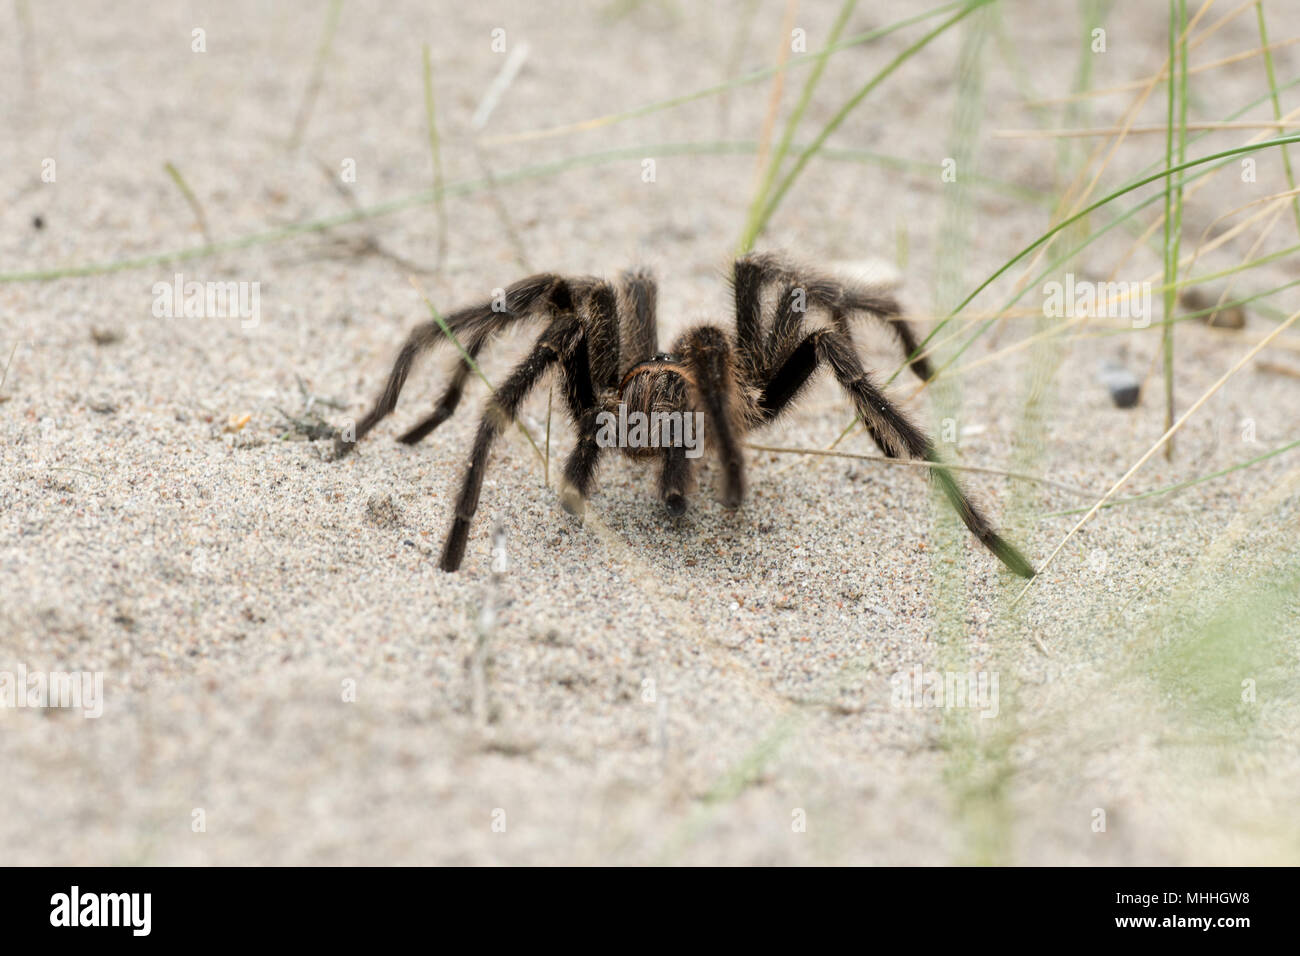 Tarantula Spider close on the sand background in Patagonia, Argentina Stock Photo